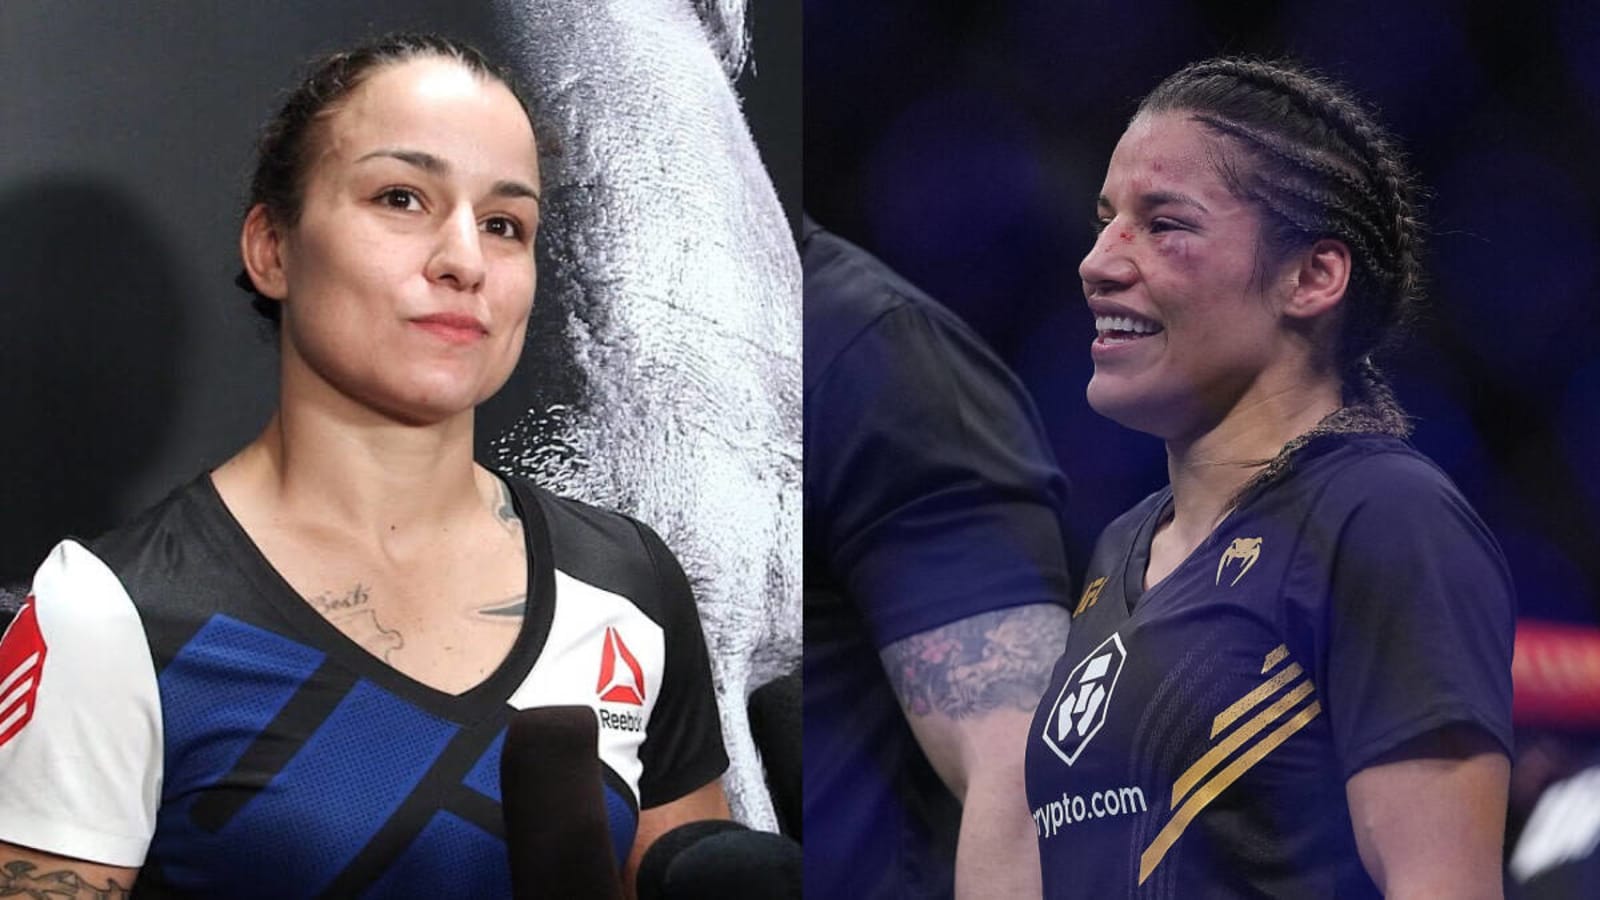 Raquel Pennington Told What To Do To Bridge &#39;Night & Day&#39; Gap With Julianna Peña: &#39;If You Want To Be Champion For A Long Time...&#39;